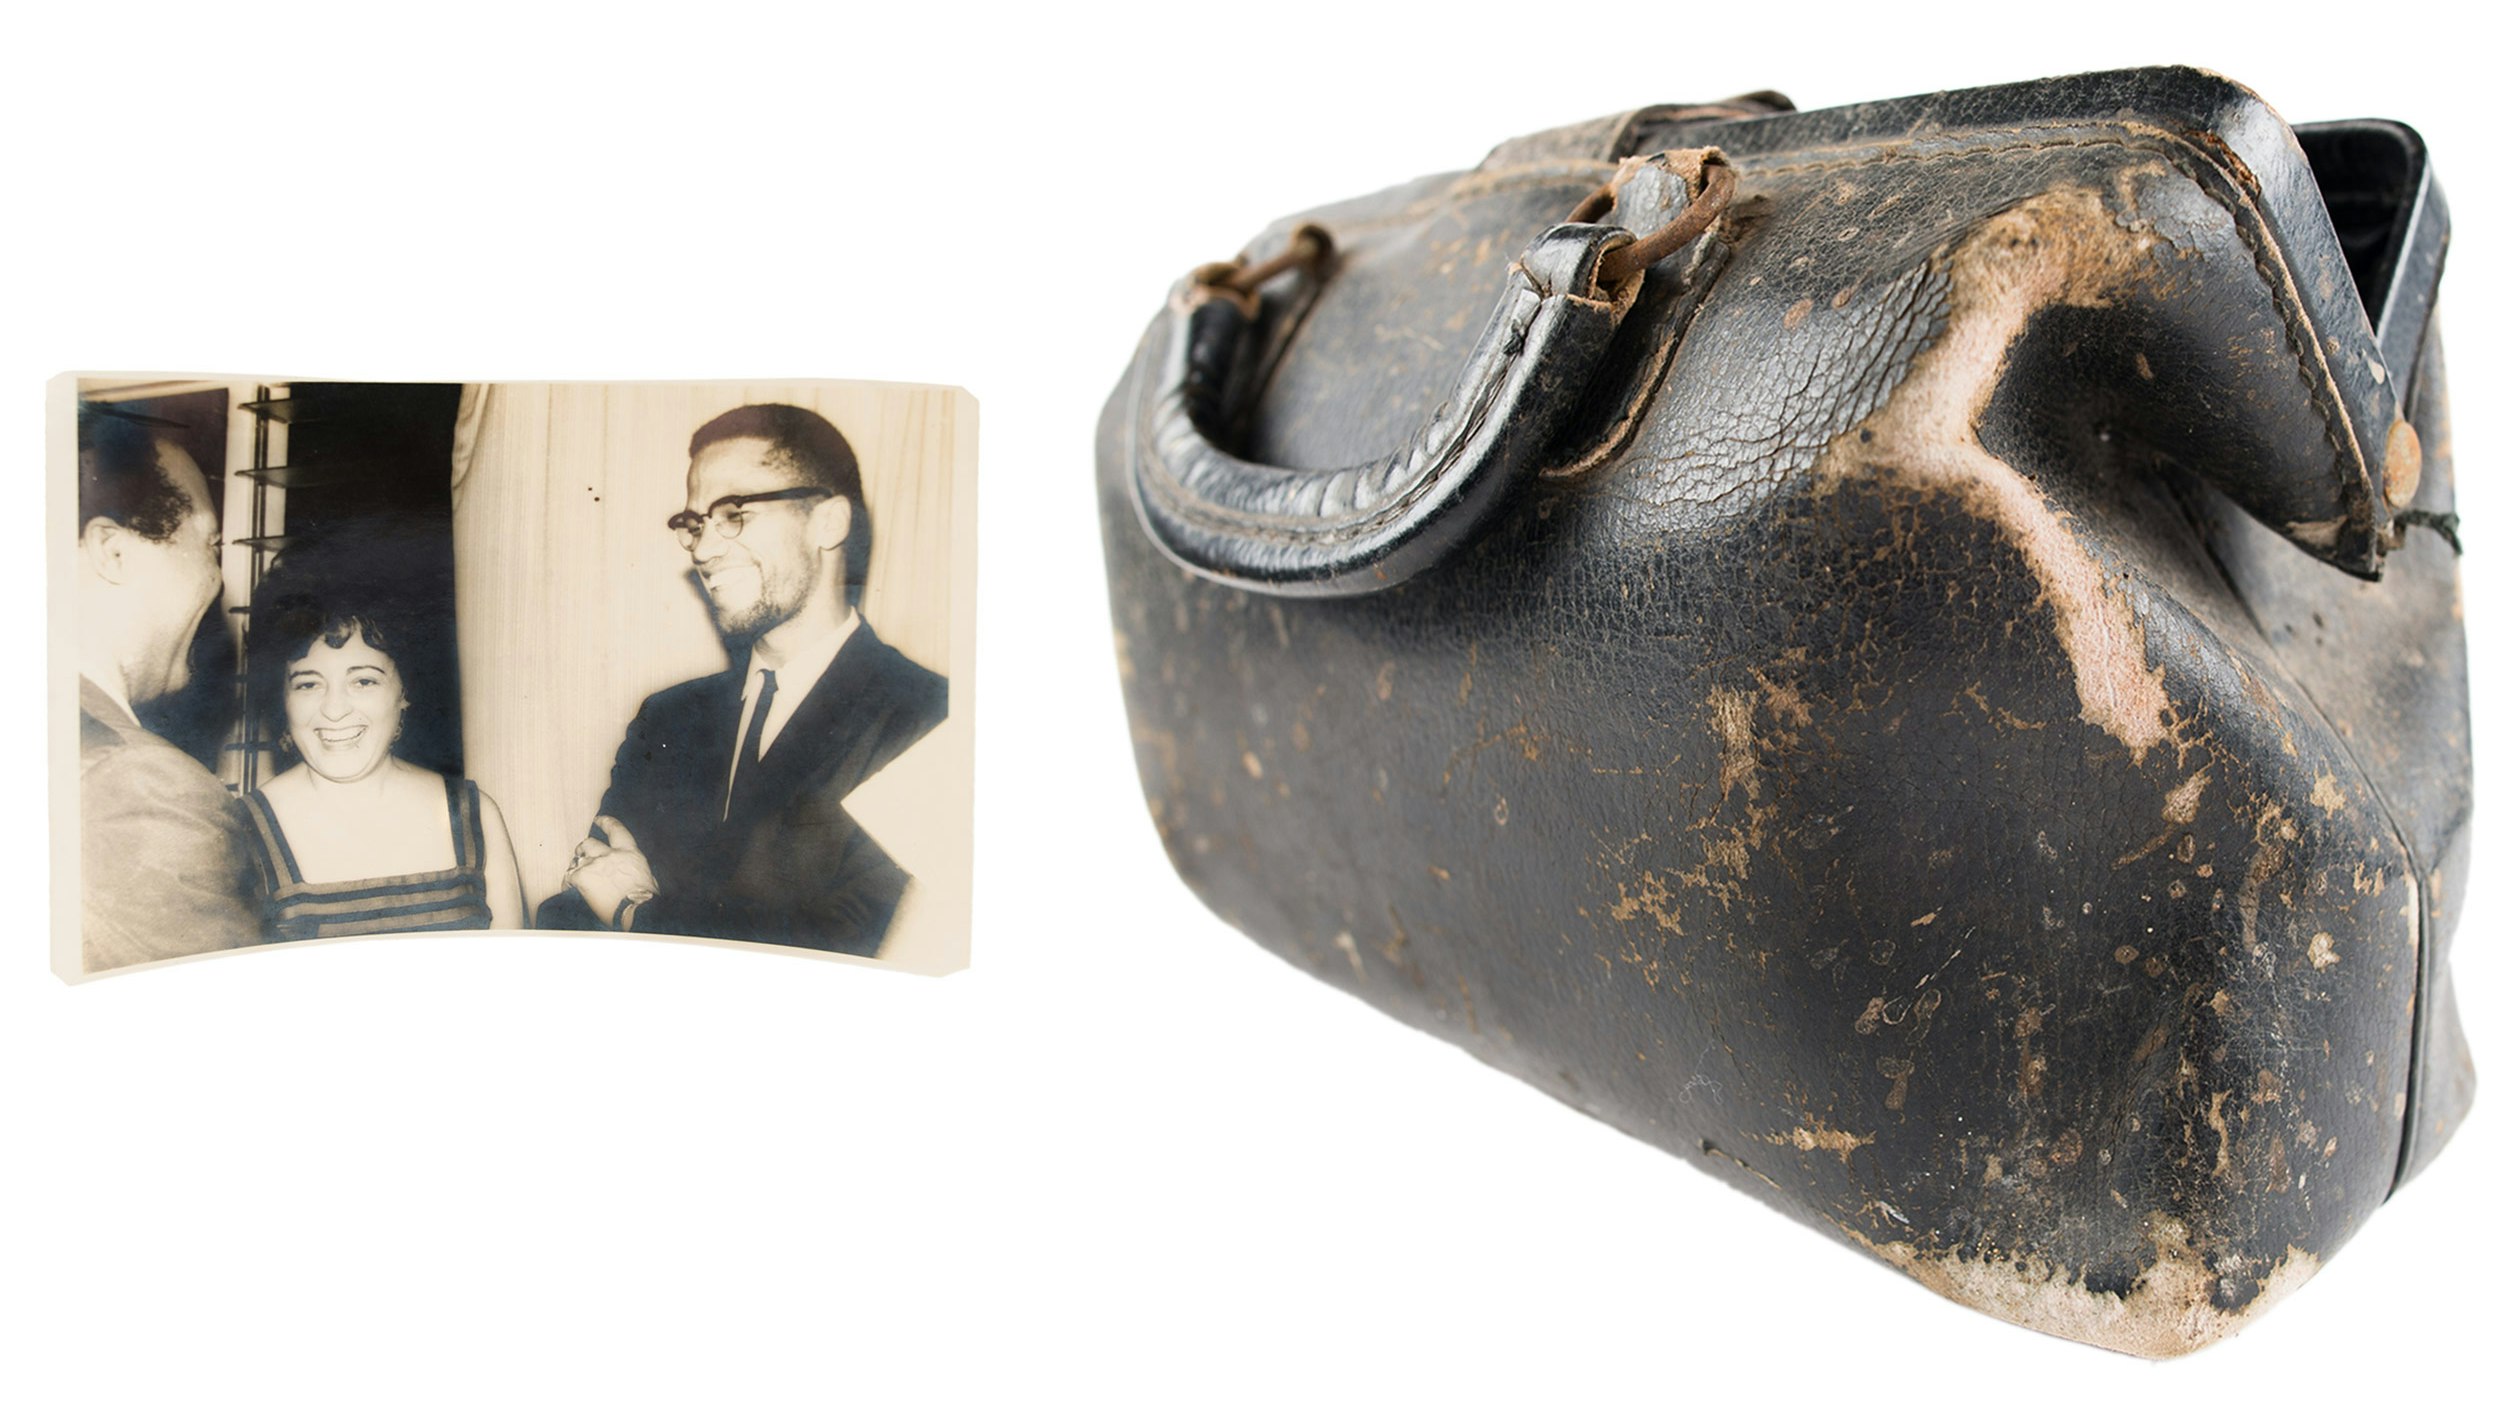 A vintage photograph next to a well-used medical bag